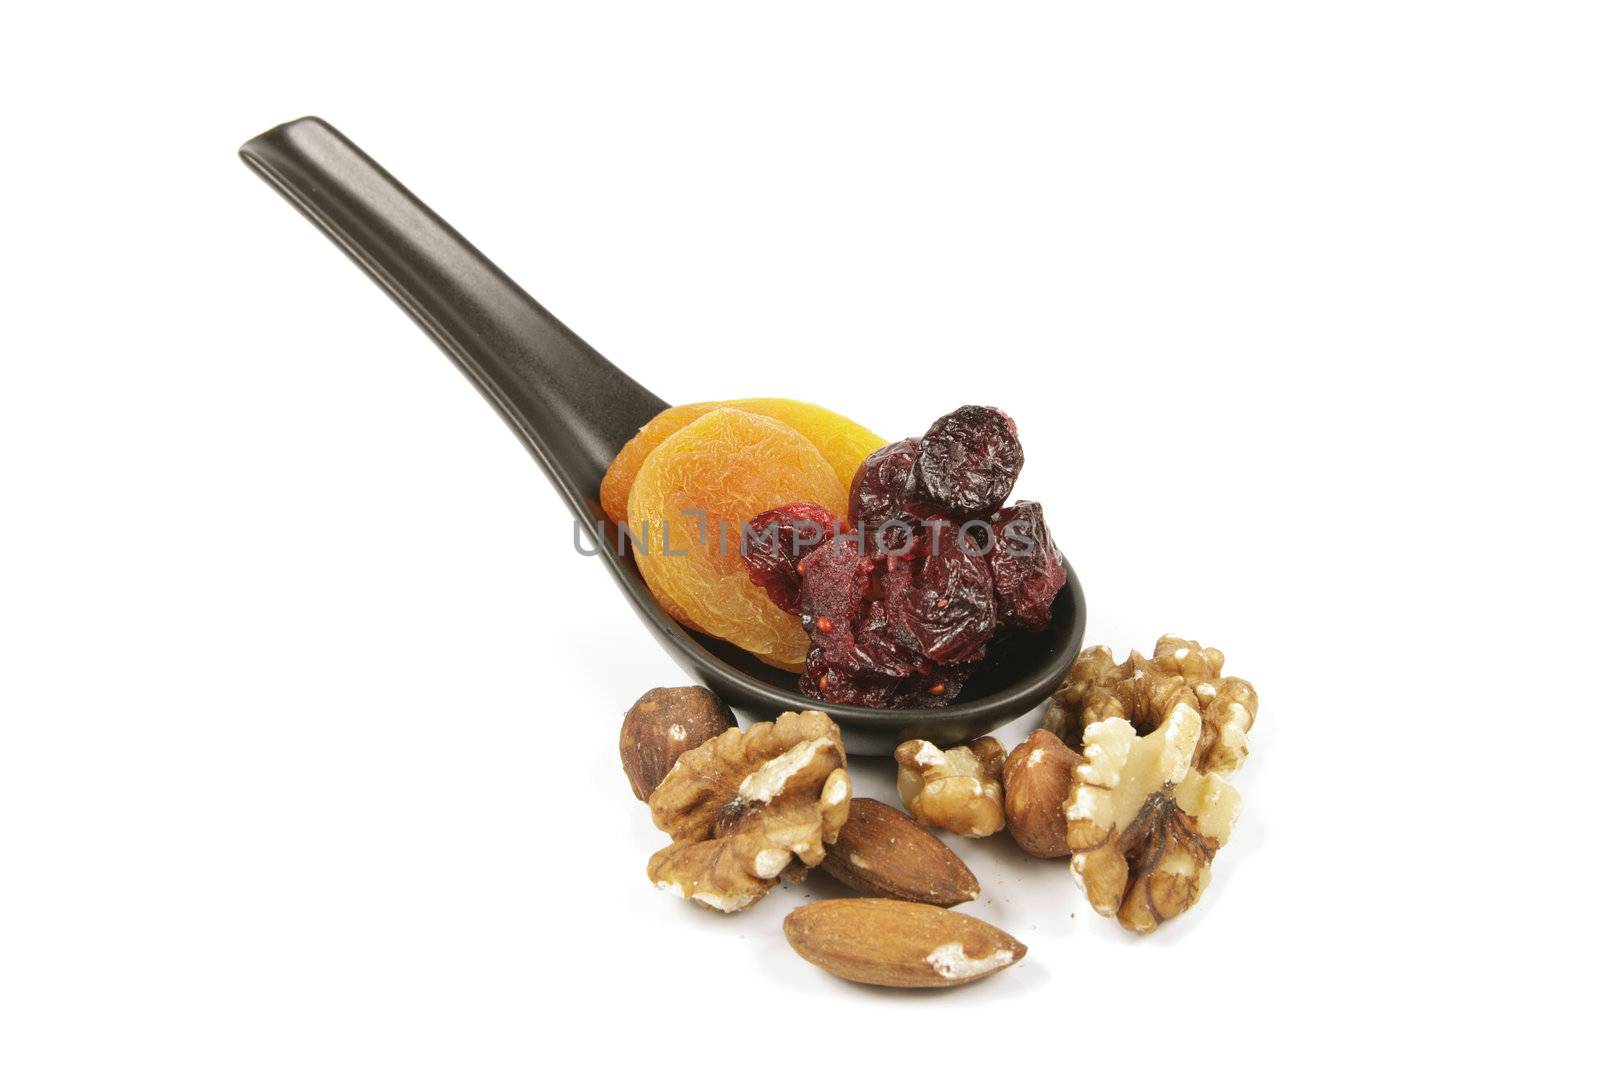 Red ripe dried cranberries and dried orange apricots on a small black spoon with mixed nuts on a reflective white background